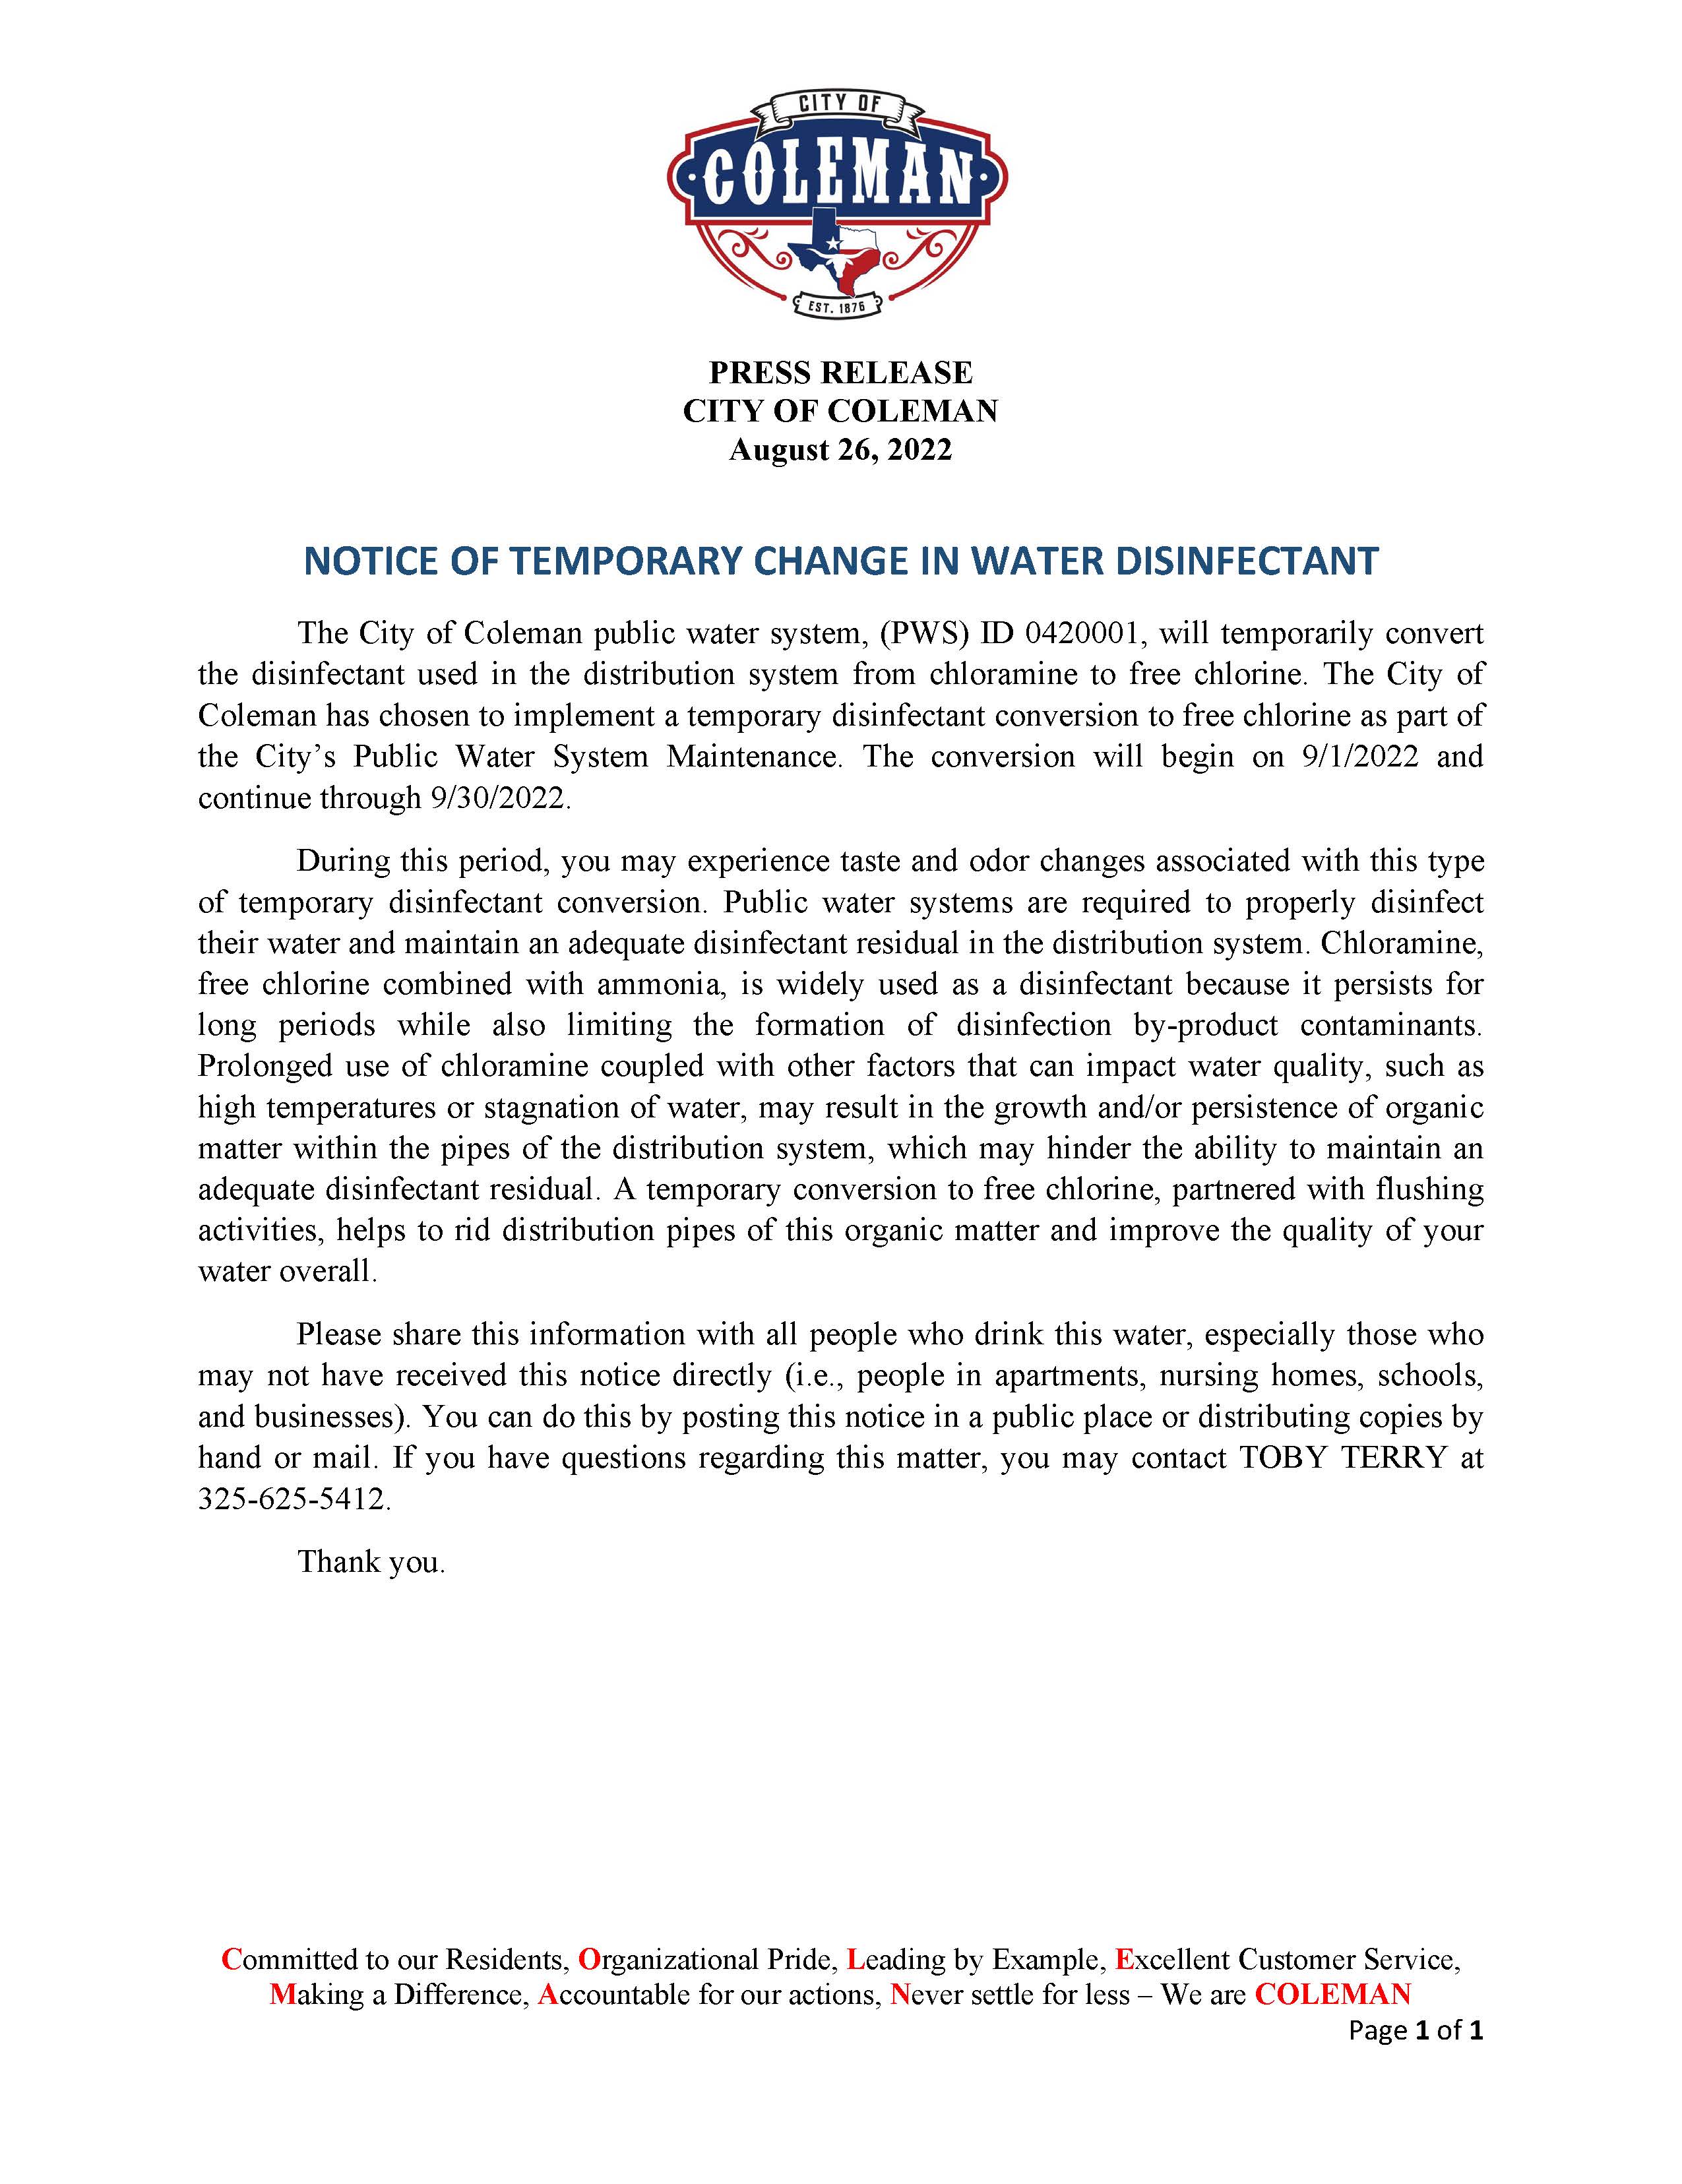 Notice of Change in Water Disinfectant from Chloramine to Free Chlorine